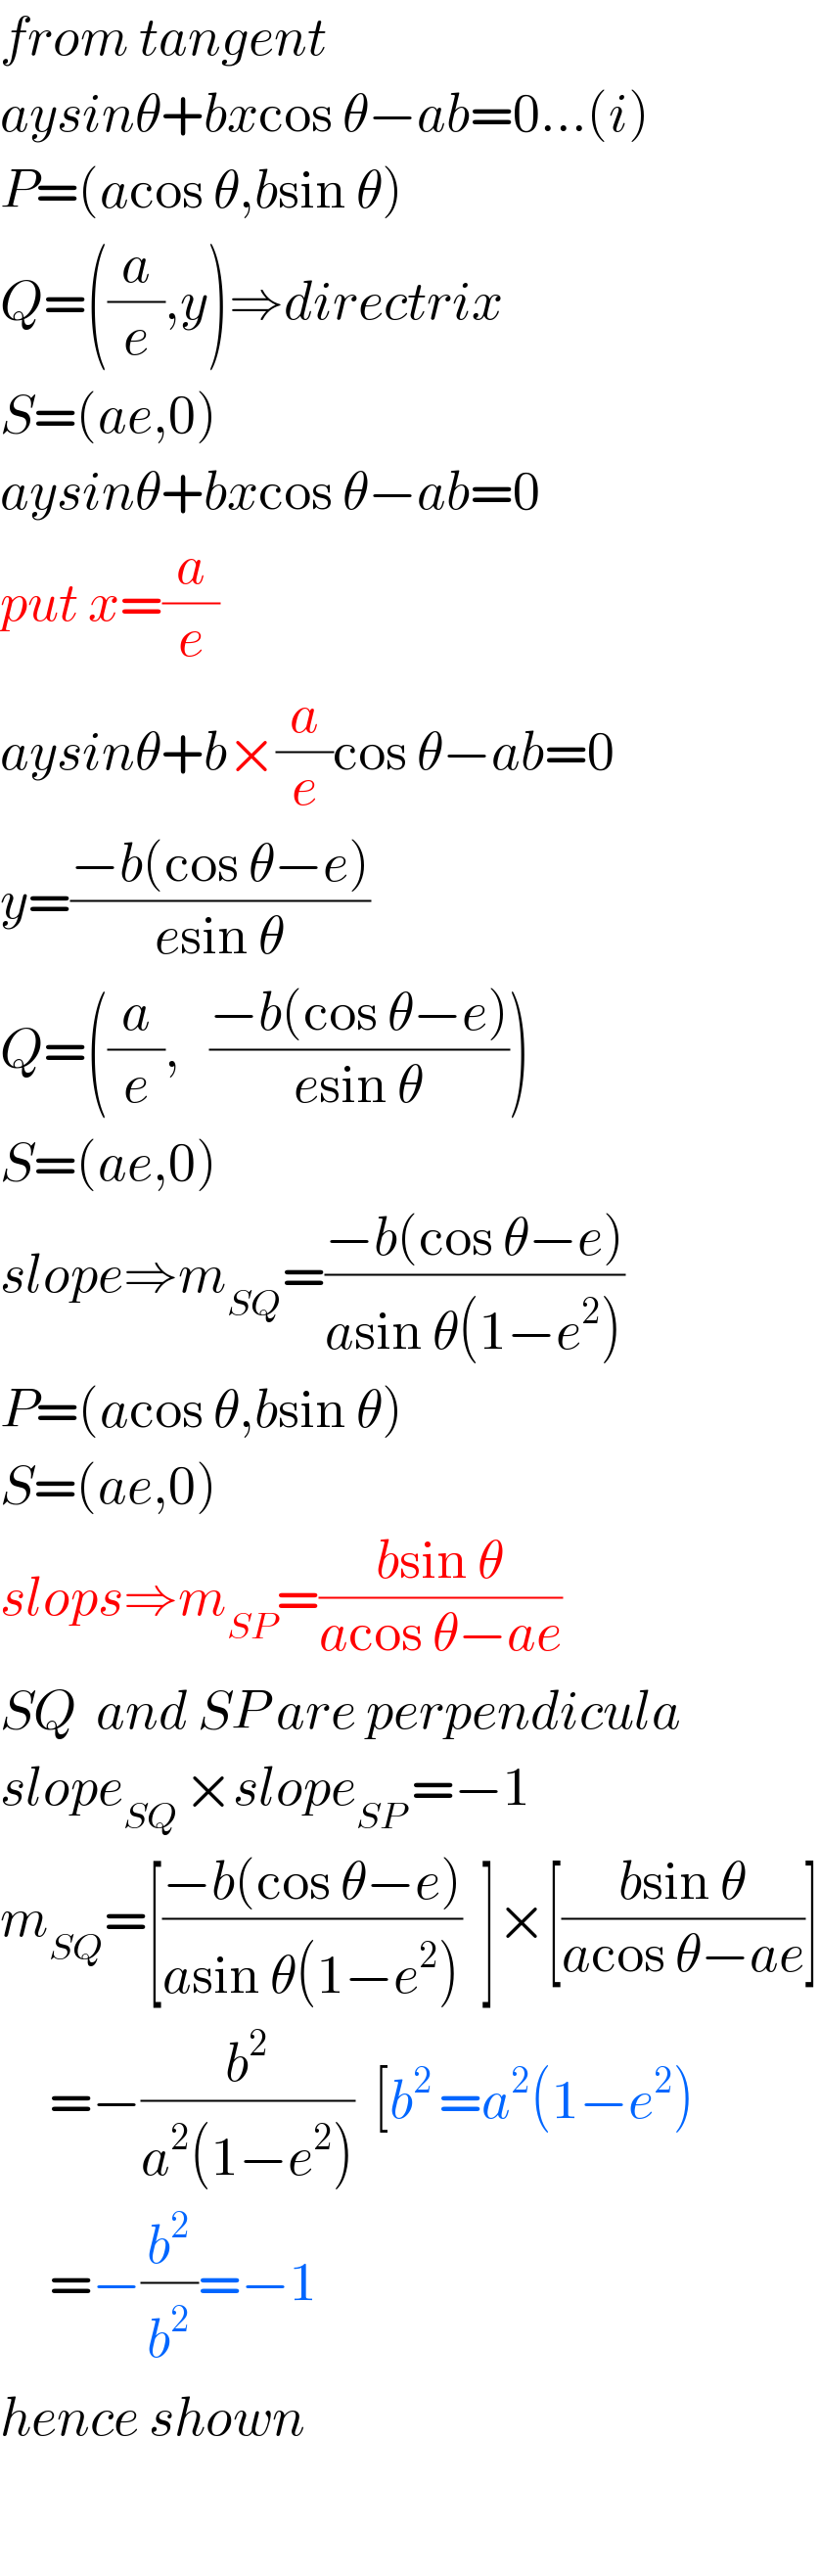 from tangent  aysinθ+bxcos θ−ab=0...(i)  P=(acos θ,bsin θ)  Q=((a/e),y)⇒directrix  S=(ae,0)  aysinθ+bxcos θ−ab=0  put x=(a/e)     aysinθ+b×(a/e)cos θ−ab=0  y=((−b(cos θ−e))/(esin θ))  Q=((a/e),   ((−b(cos θ−e))/(esin θ)))  S=(ae,0)  slope⇒m_(SQ) =((−b(cos θ−e))/(asin θ(1−e^2 )))  P=(acos θ,bsin θ)  S=(ae,0)  slops⇒m_(SP) =((bsin θ)/(acos θ−ae))  SQ  and SP are perpendicula  slope_(SQ ) ×slope_(SP ) =−1  m_(SQ) =[((−b(cos θ−e))/(asin θ(1−e^2 )))  ]×[((bsin θ)/(acos θ−ae))]       =−(b^2 /(a^2 (1−e^2 )))  [b^(2 ) =a^2 (1−e^2 )       =−(b^2 /b^2 )=−1  hence shown    